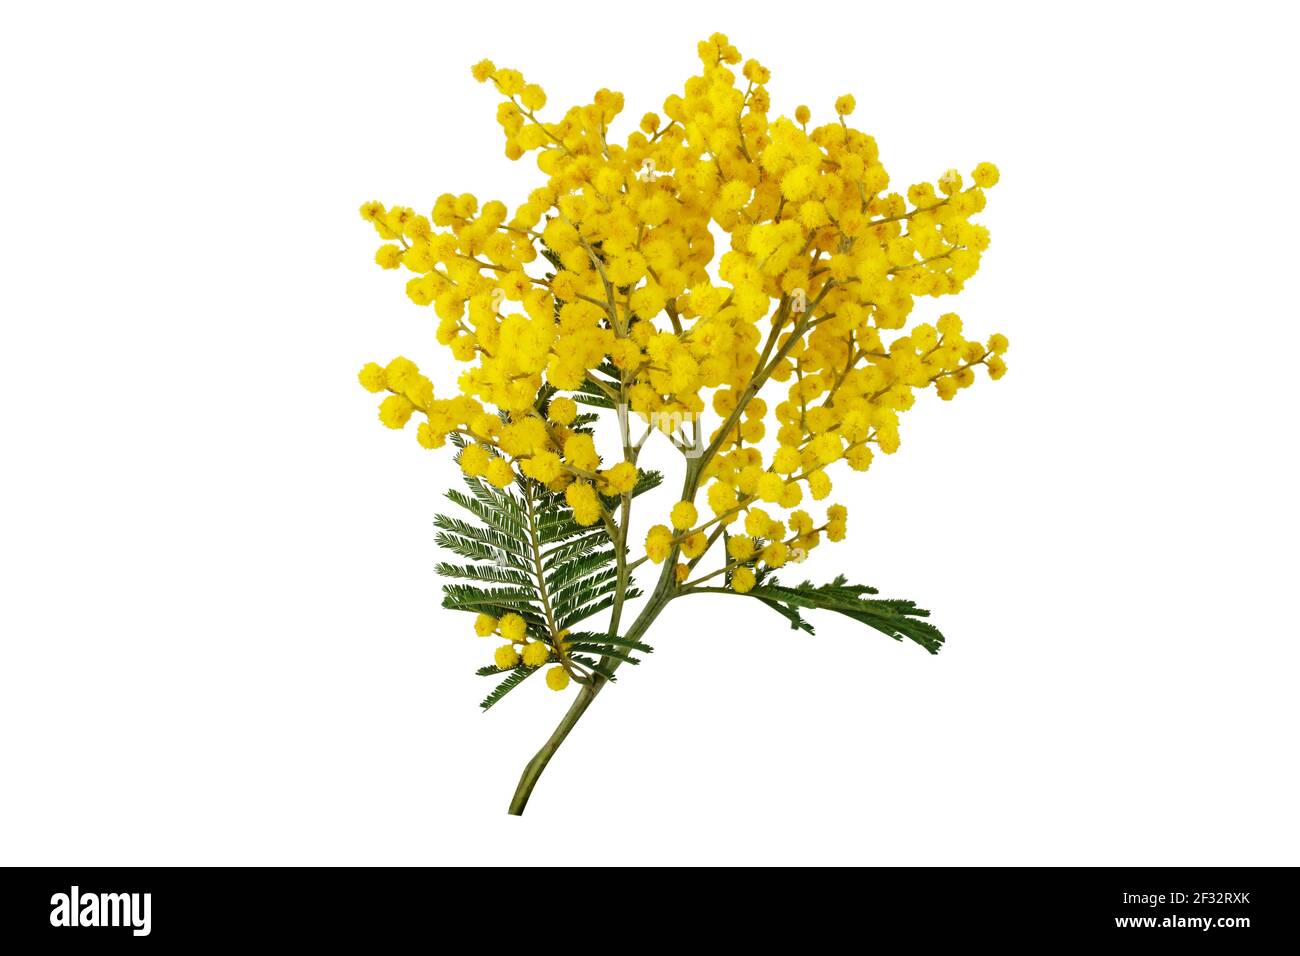 Silver Wattle Tree Branch Isolated On White Mimosa Spring Flowers Acacia Dealbata Yellow Fluffy Balls And Leaves Stock Photo Alamy